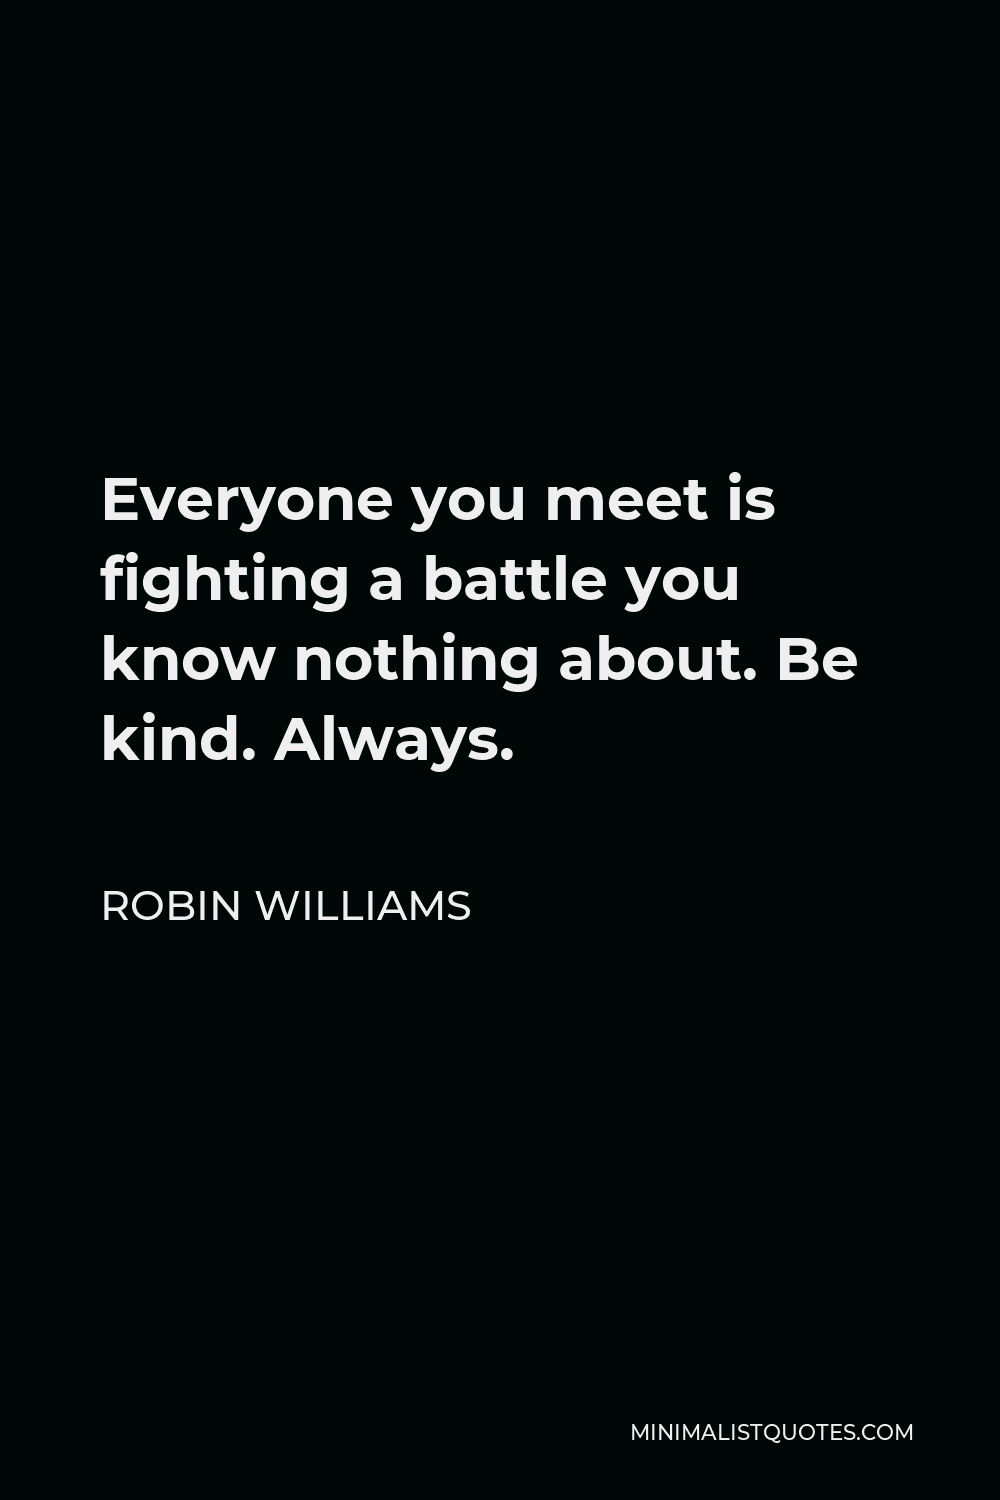 Robin Williams Quote Everyone You Meet Is Fighting A Battle You Know Nothing About Be Kind Always